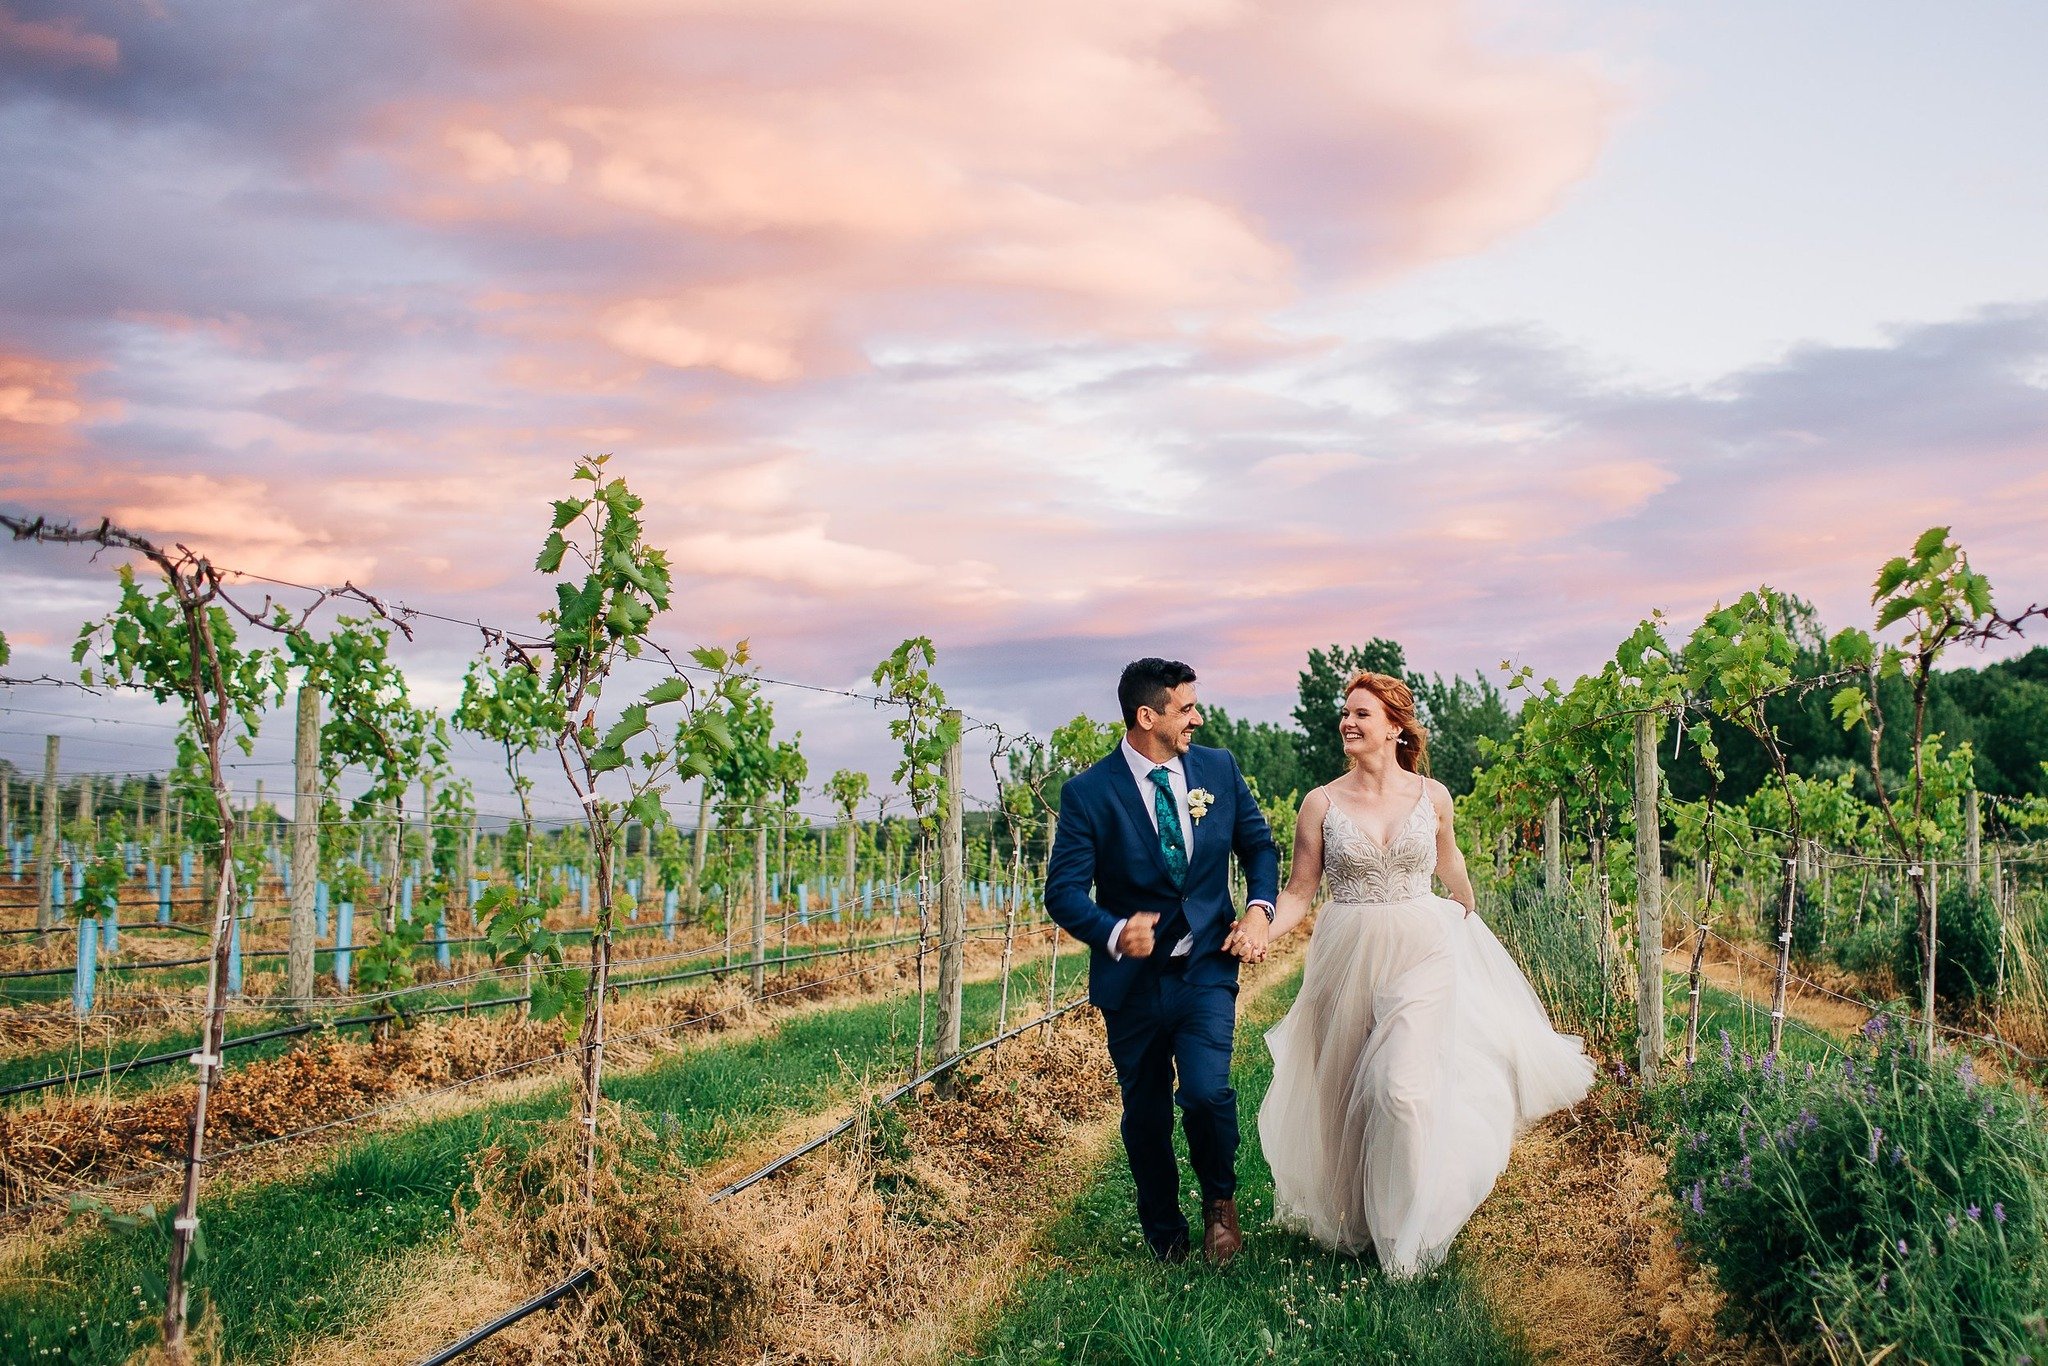 Looking back on Stephanie and Brian&rsquo;s Nostrano Vineyards wedding day for this blog felt like the happiest of memories revisited. It was the wildest of weather days - warm and sunny in the morning, windy and cloudy by midday, and so cold I had t